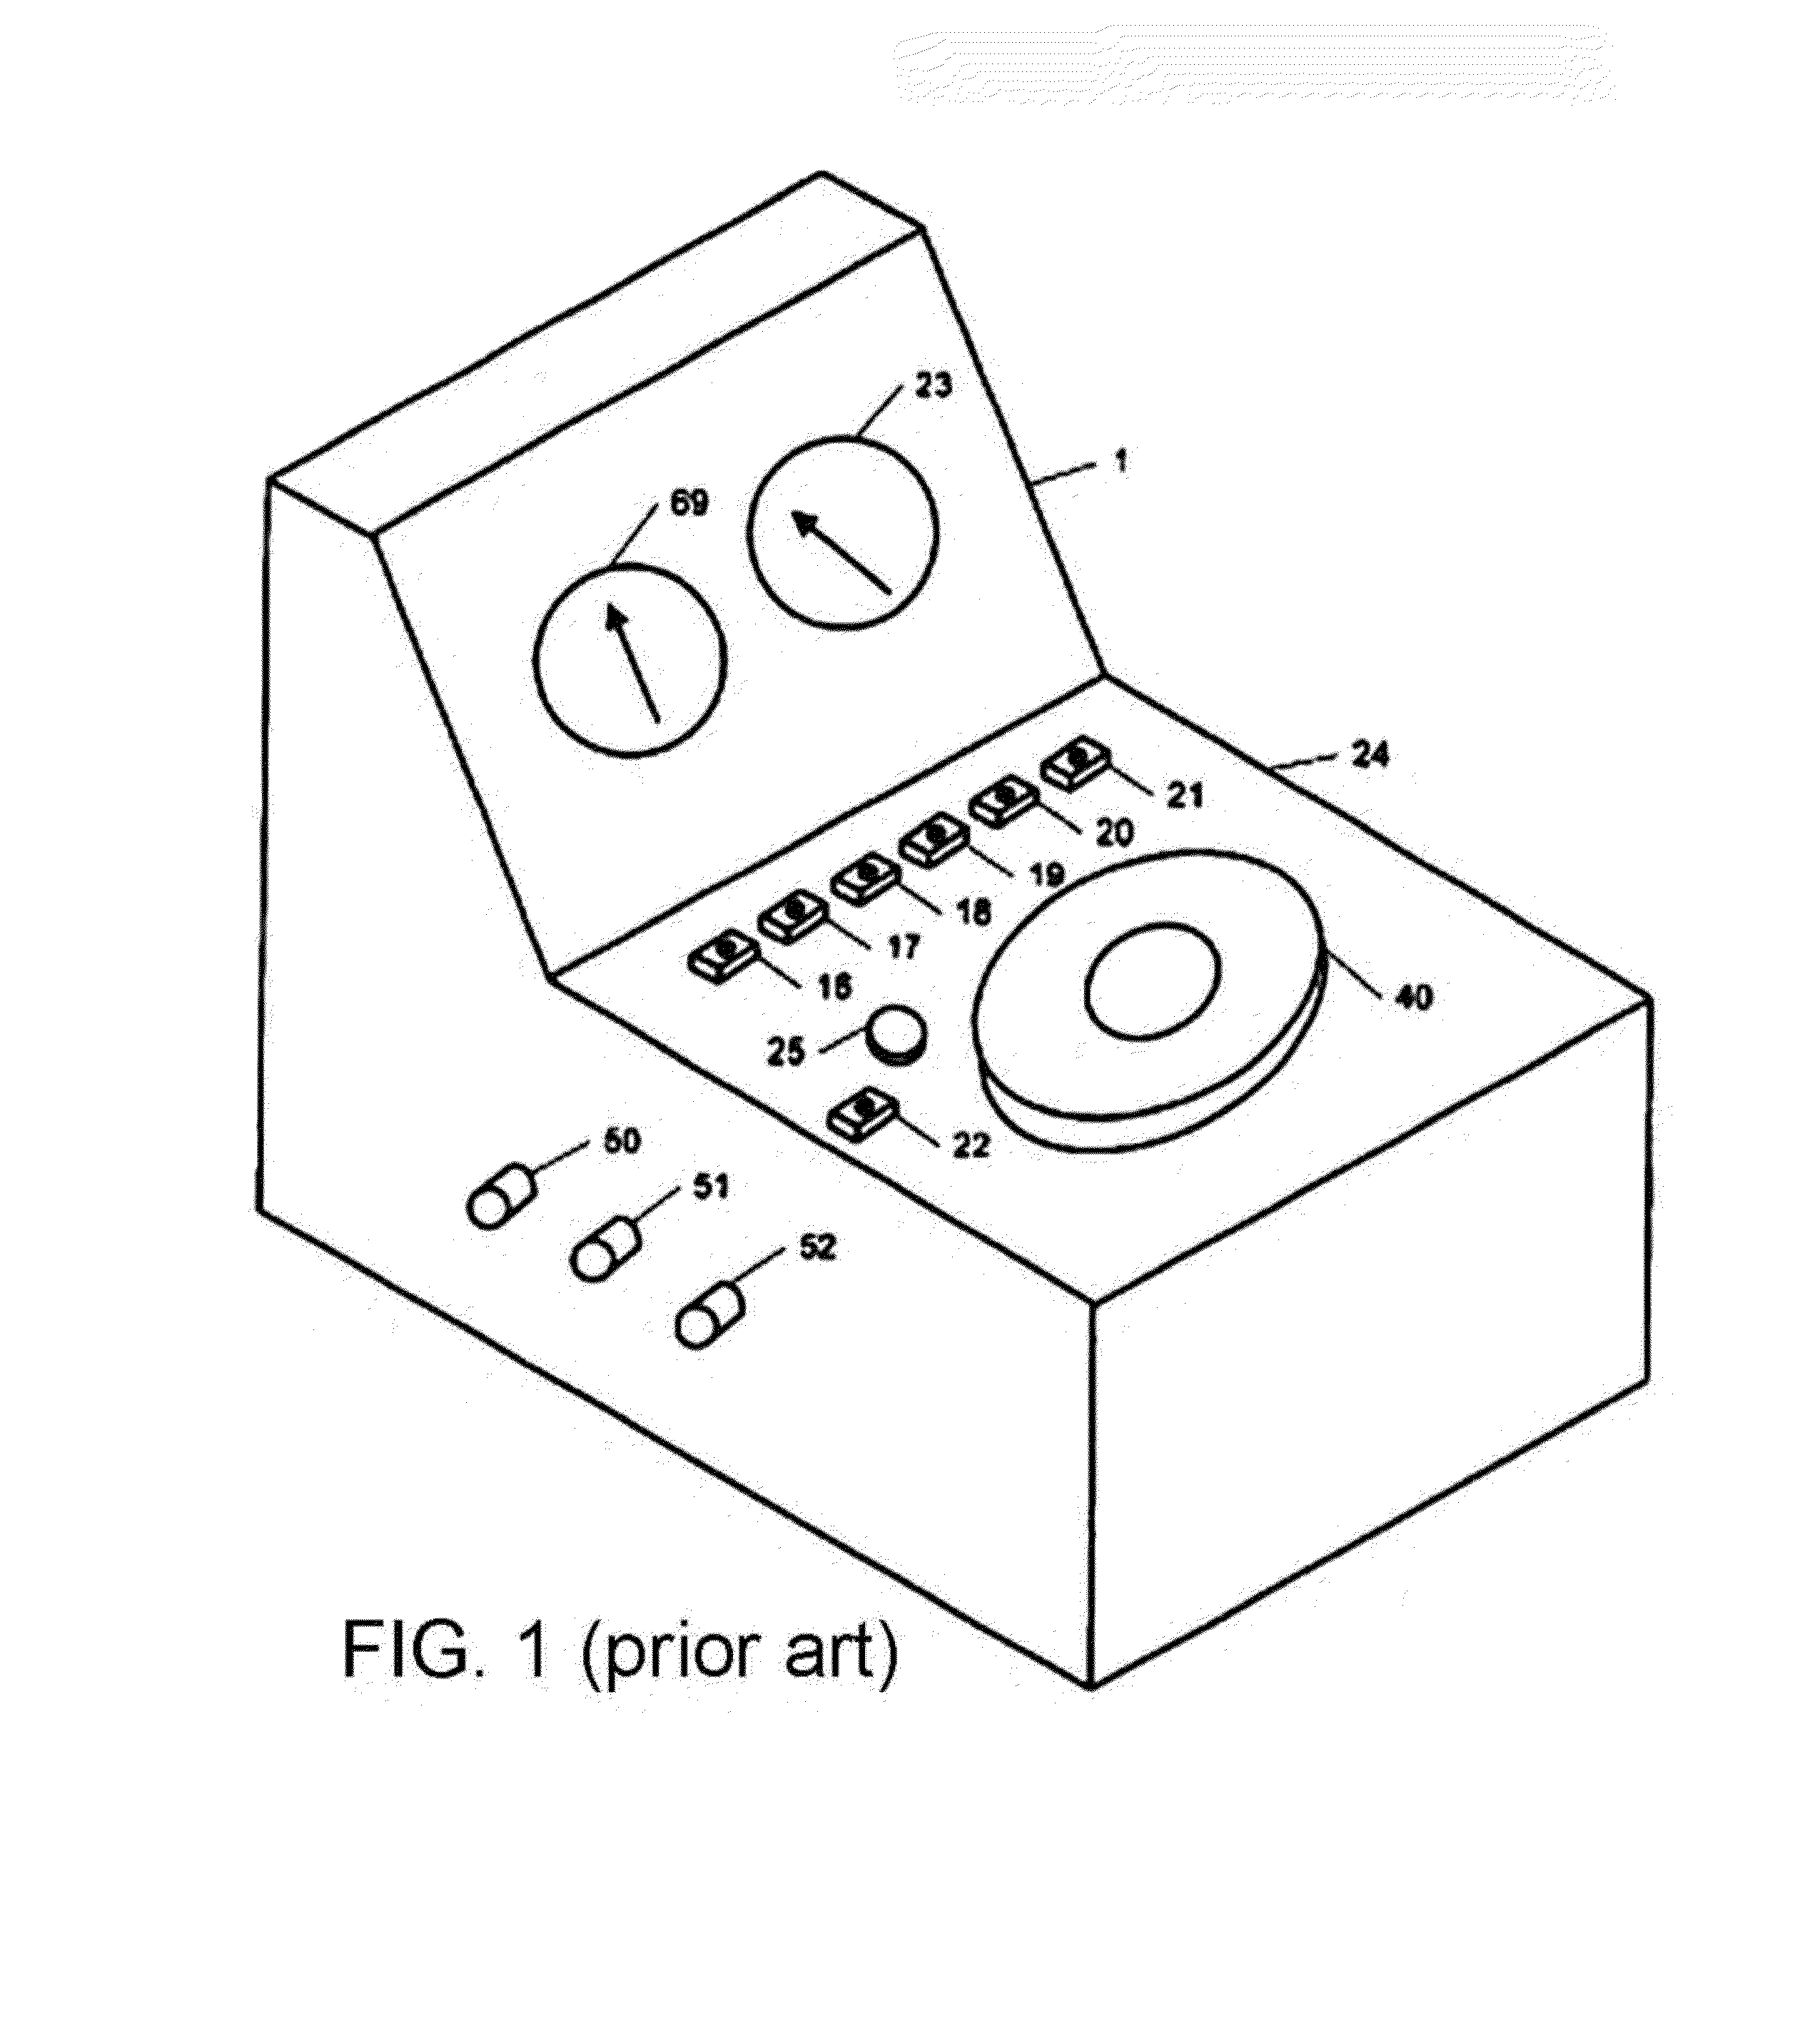 Method of supercritical point drying with stasis mode